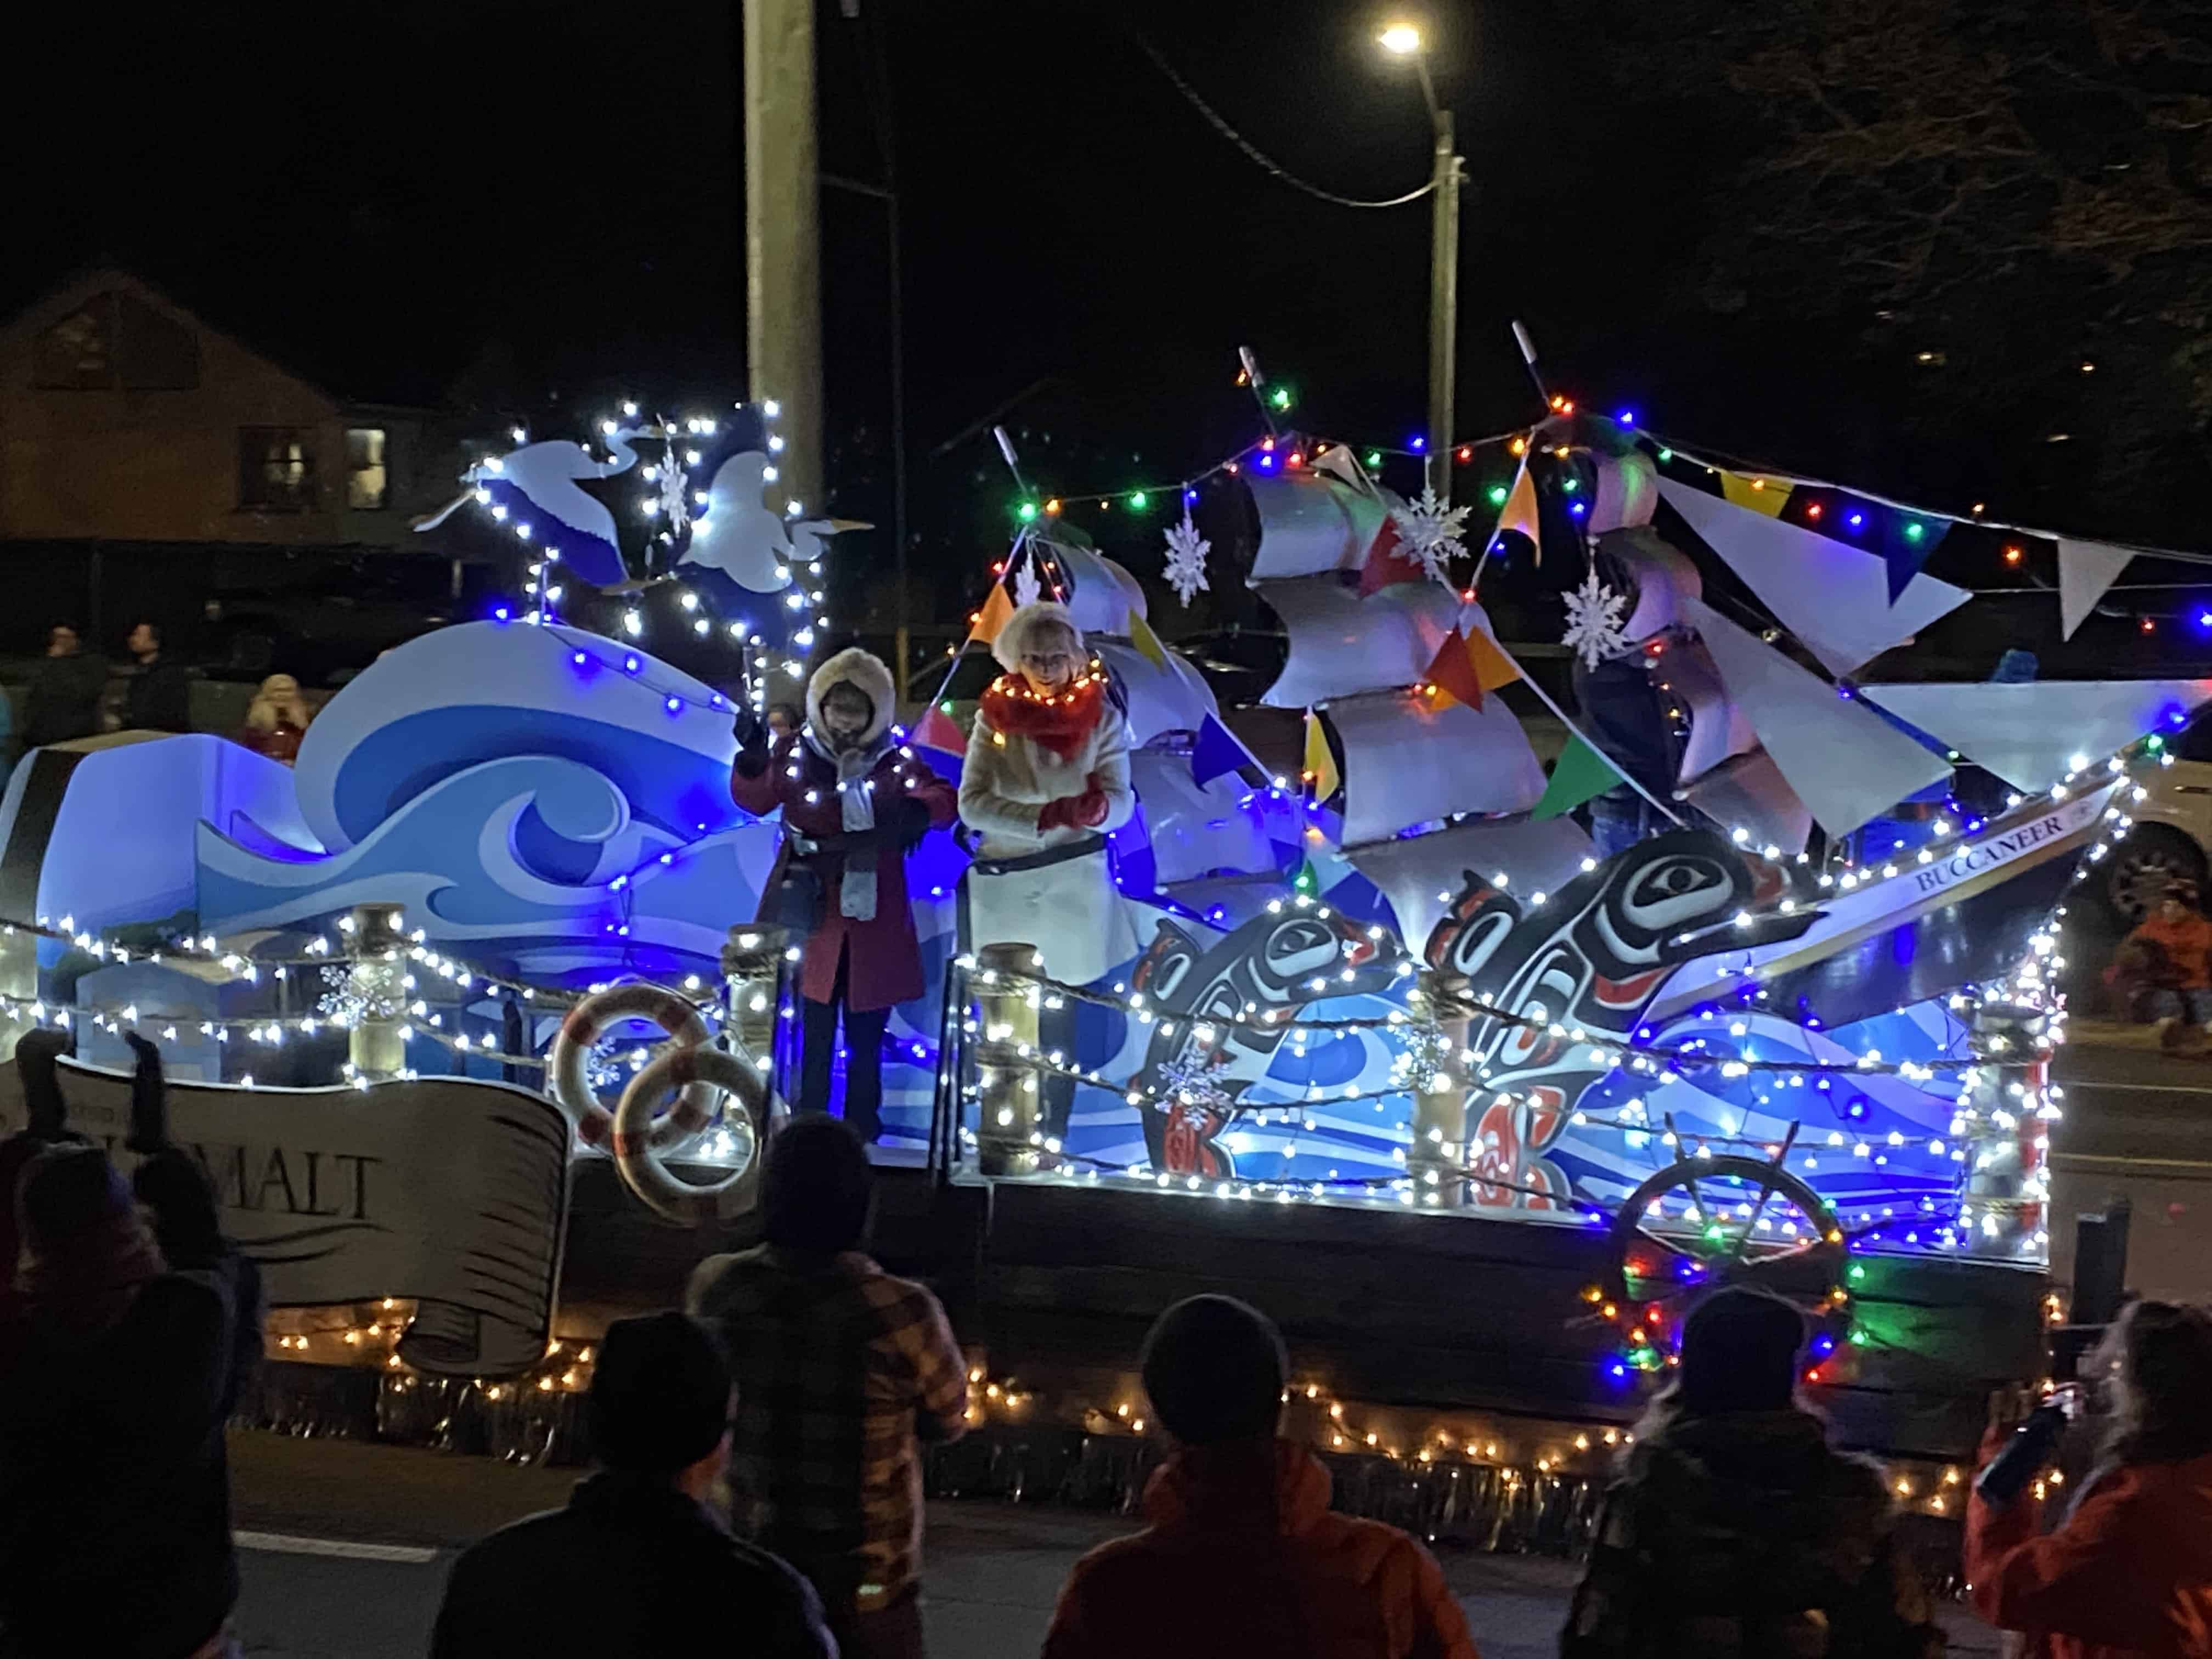 Things to do in Esquimalt - Another float in the Celebration of Lights Parade in December 2021.